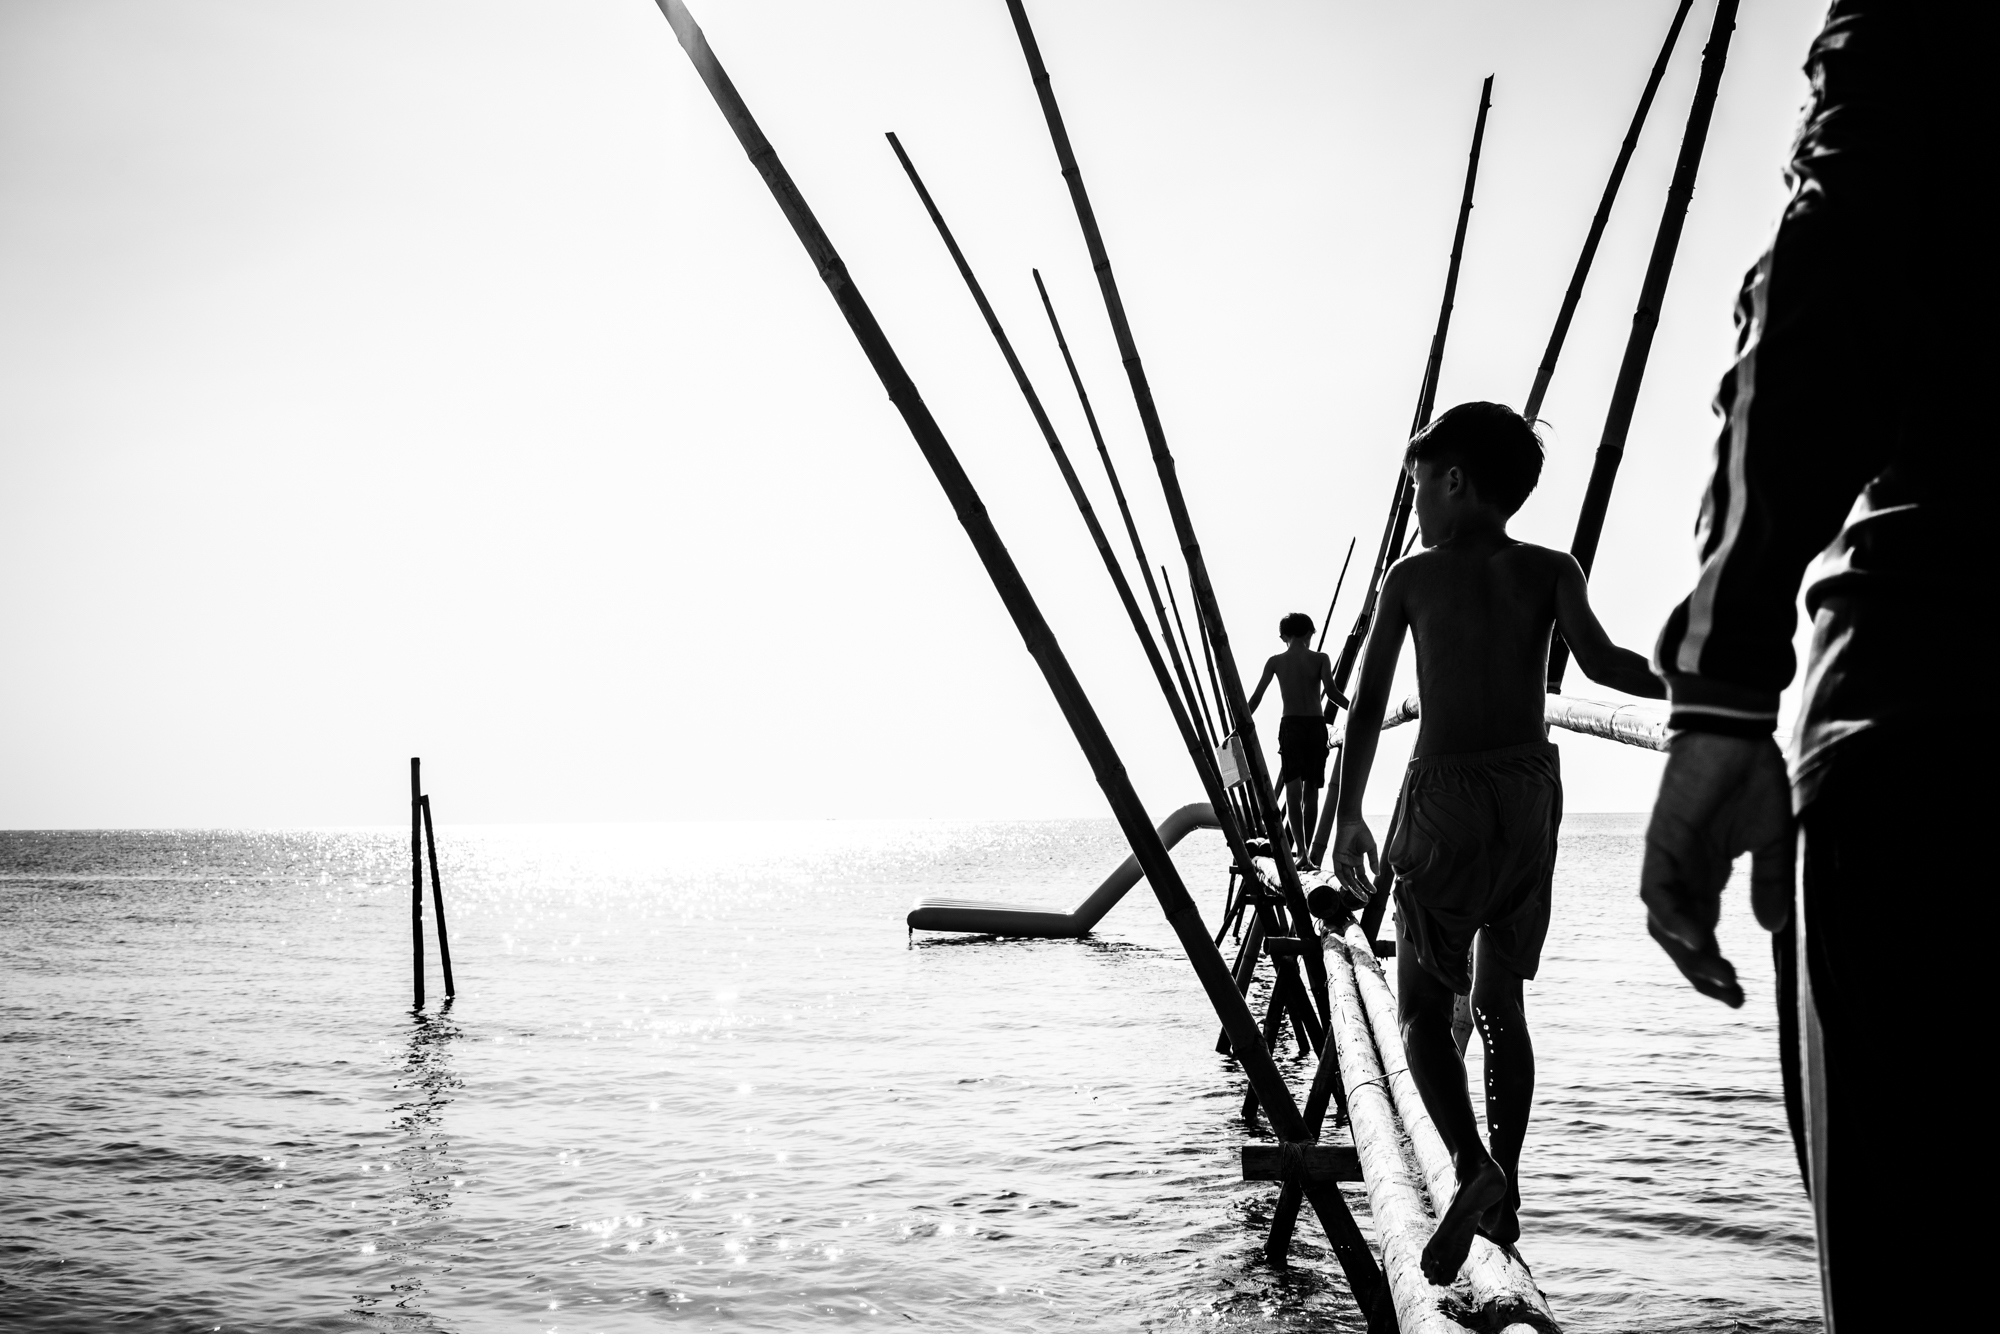 Boys play on a bamboo pier on the island’s well know Long Beach stretch.